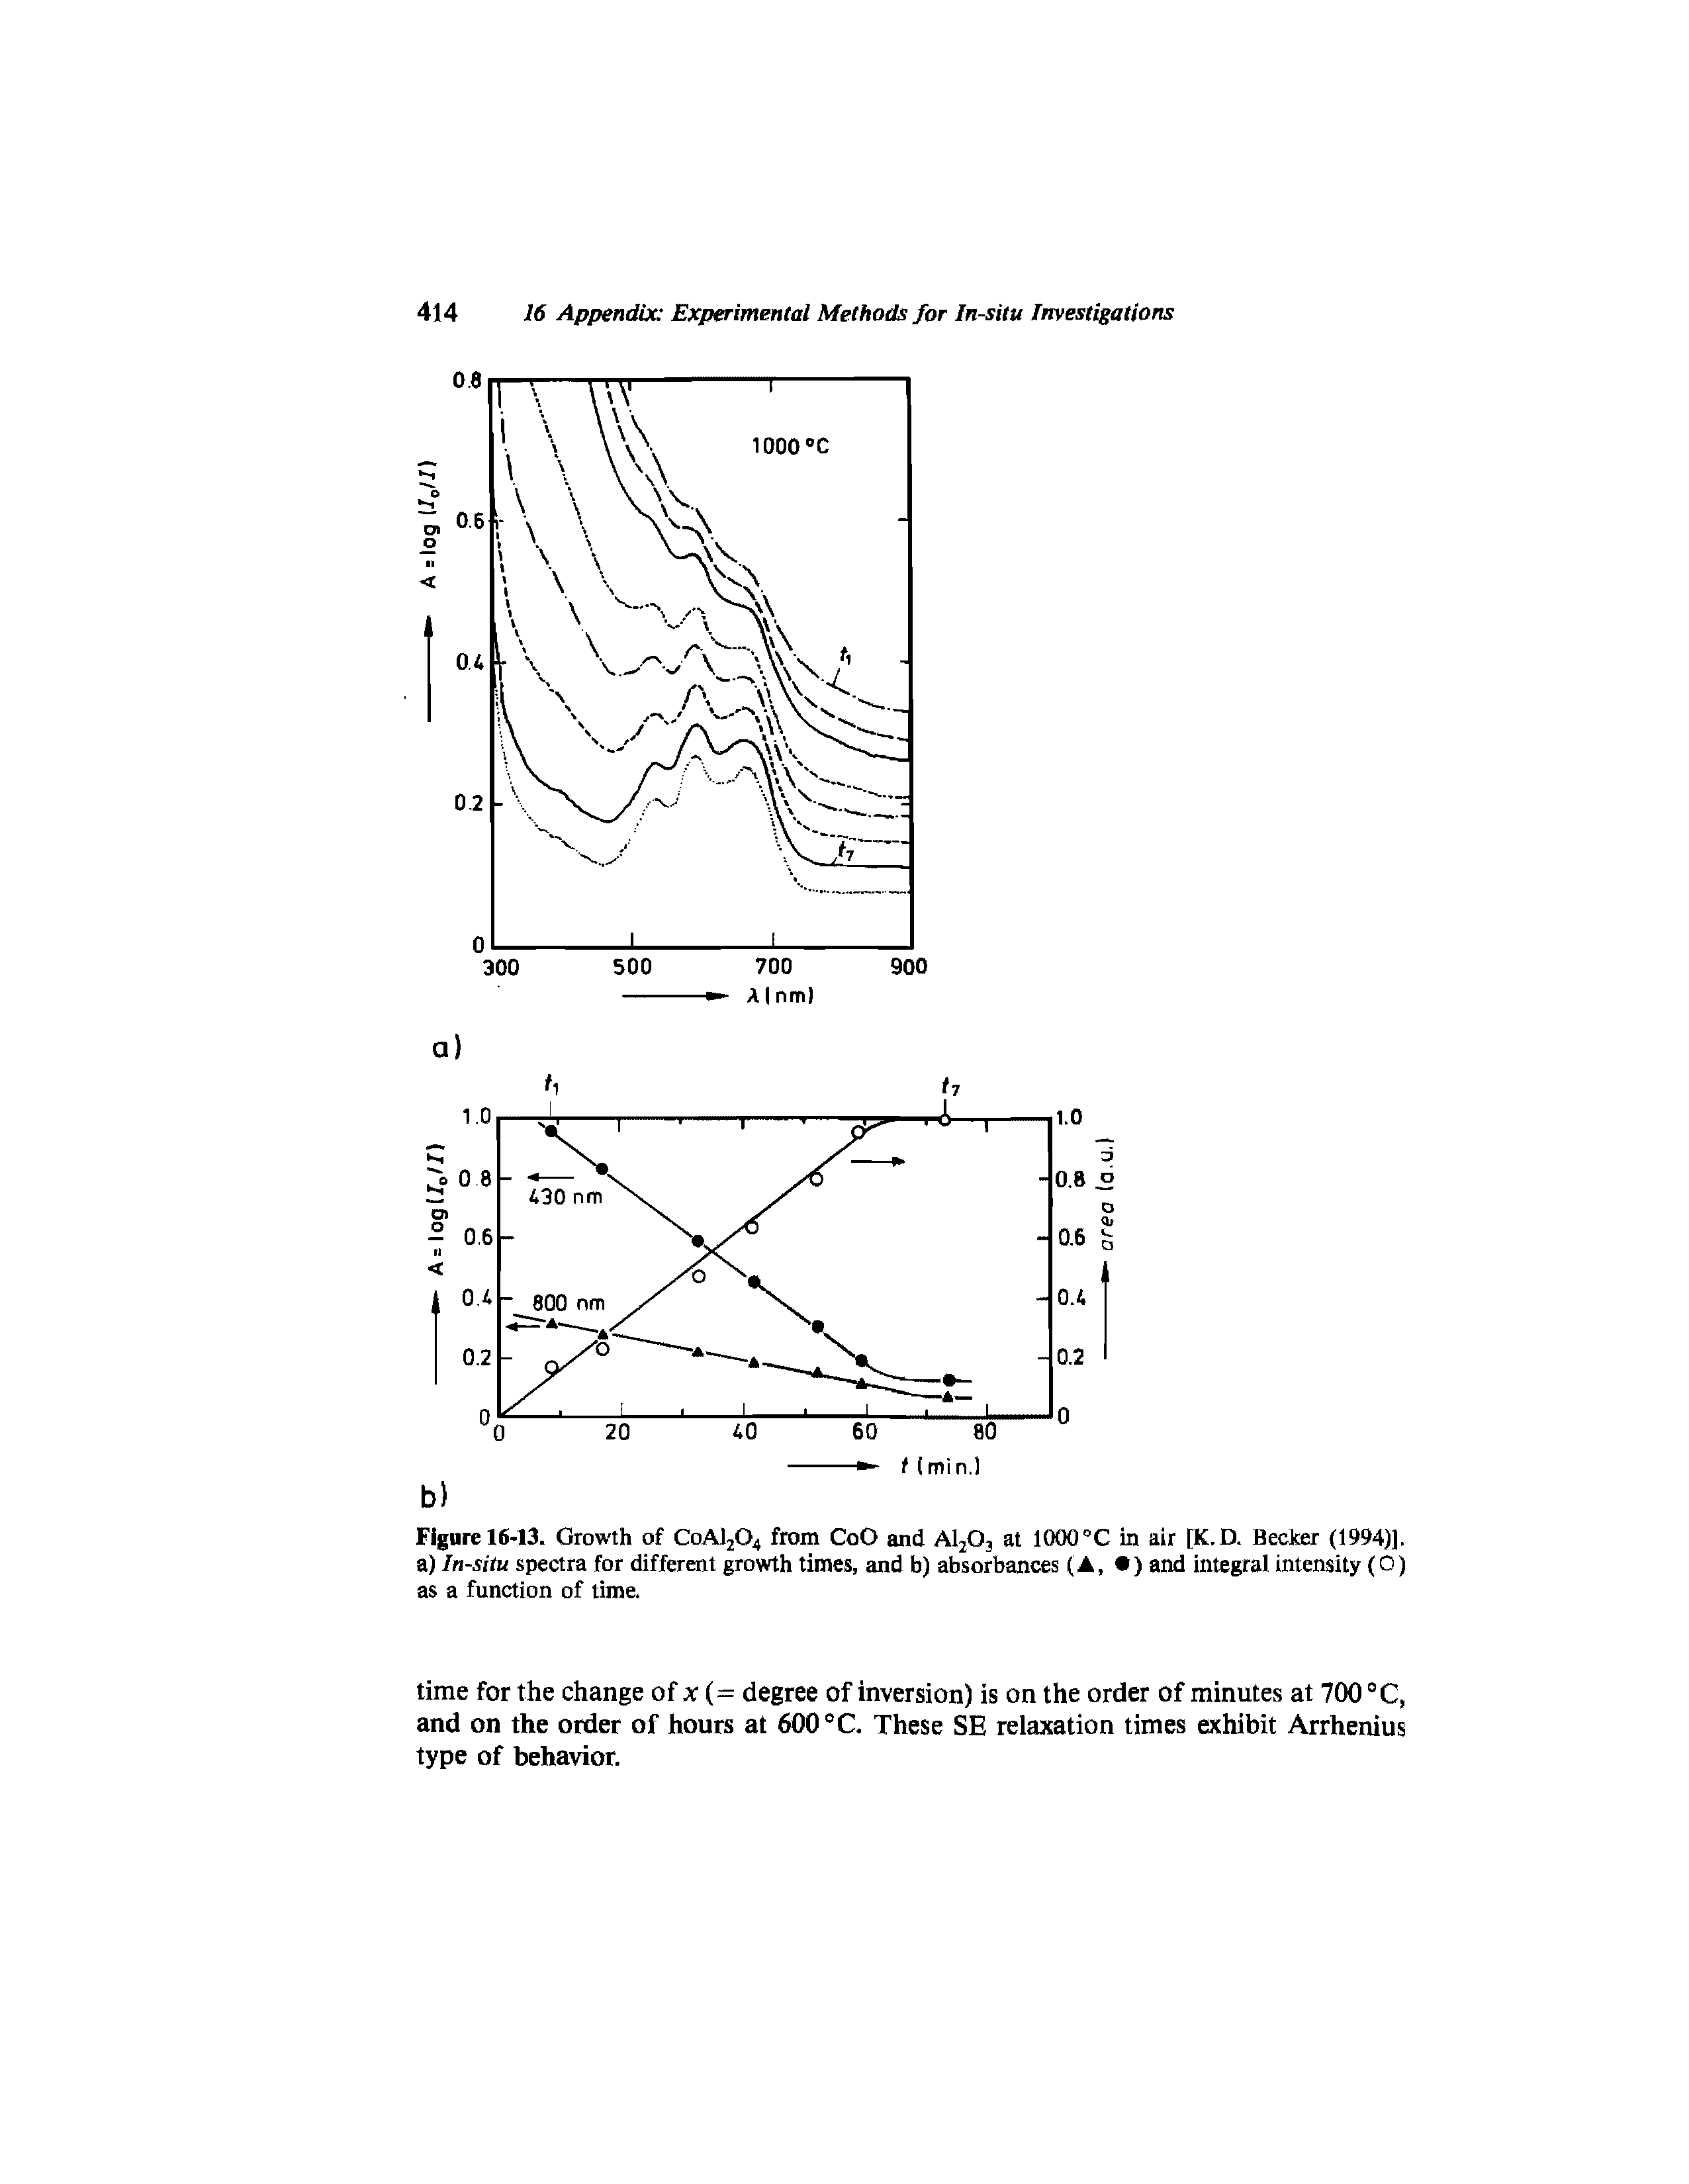 Figure 16-13. Growth of CoA1204 from CoO and A1203 at 100Q°C in air [K.D. Becker (1994)]. a) In-situ spectra for different growth times, and b) absorbances (A, ) and integral intensity (0) as a function of time.